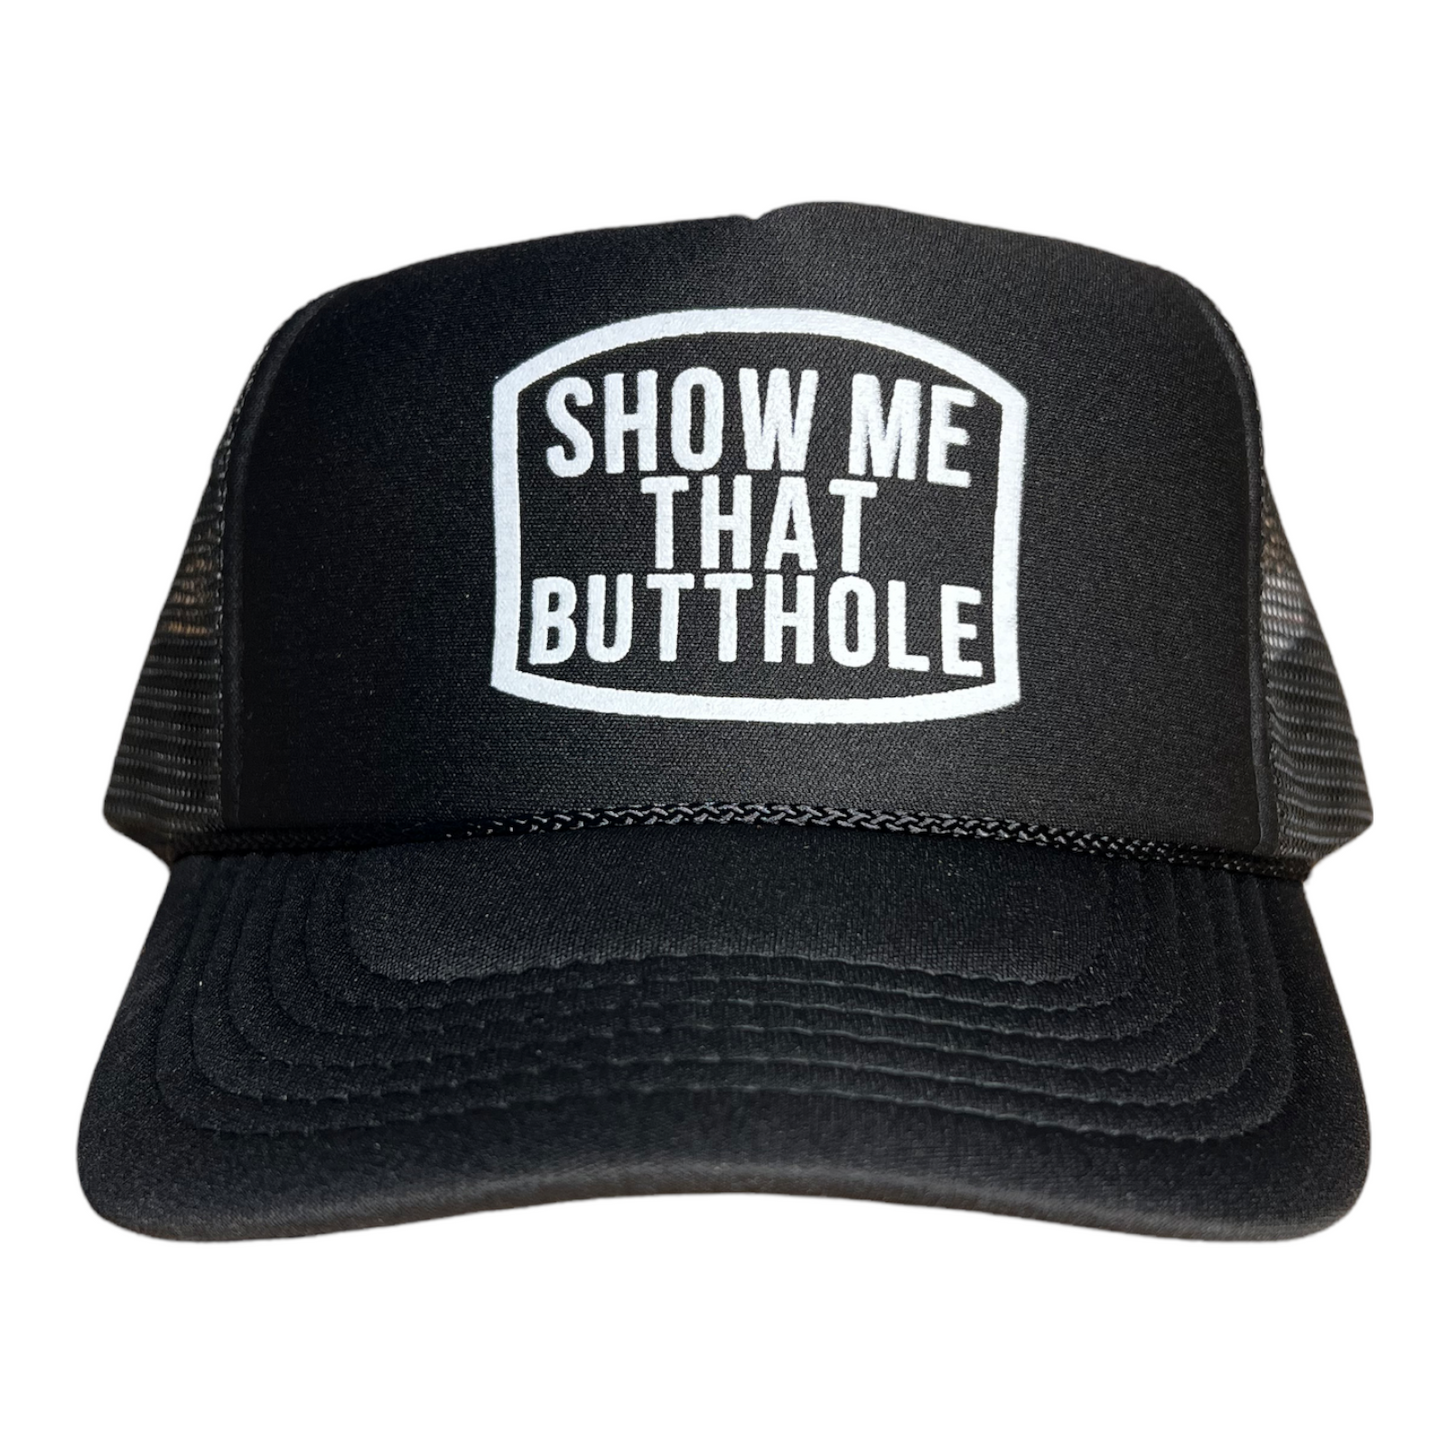 Show Me That Butthole Funny Trucker Hat Funny Trucker Hat Black